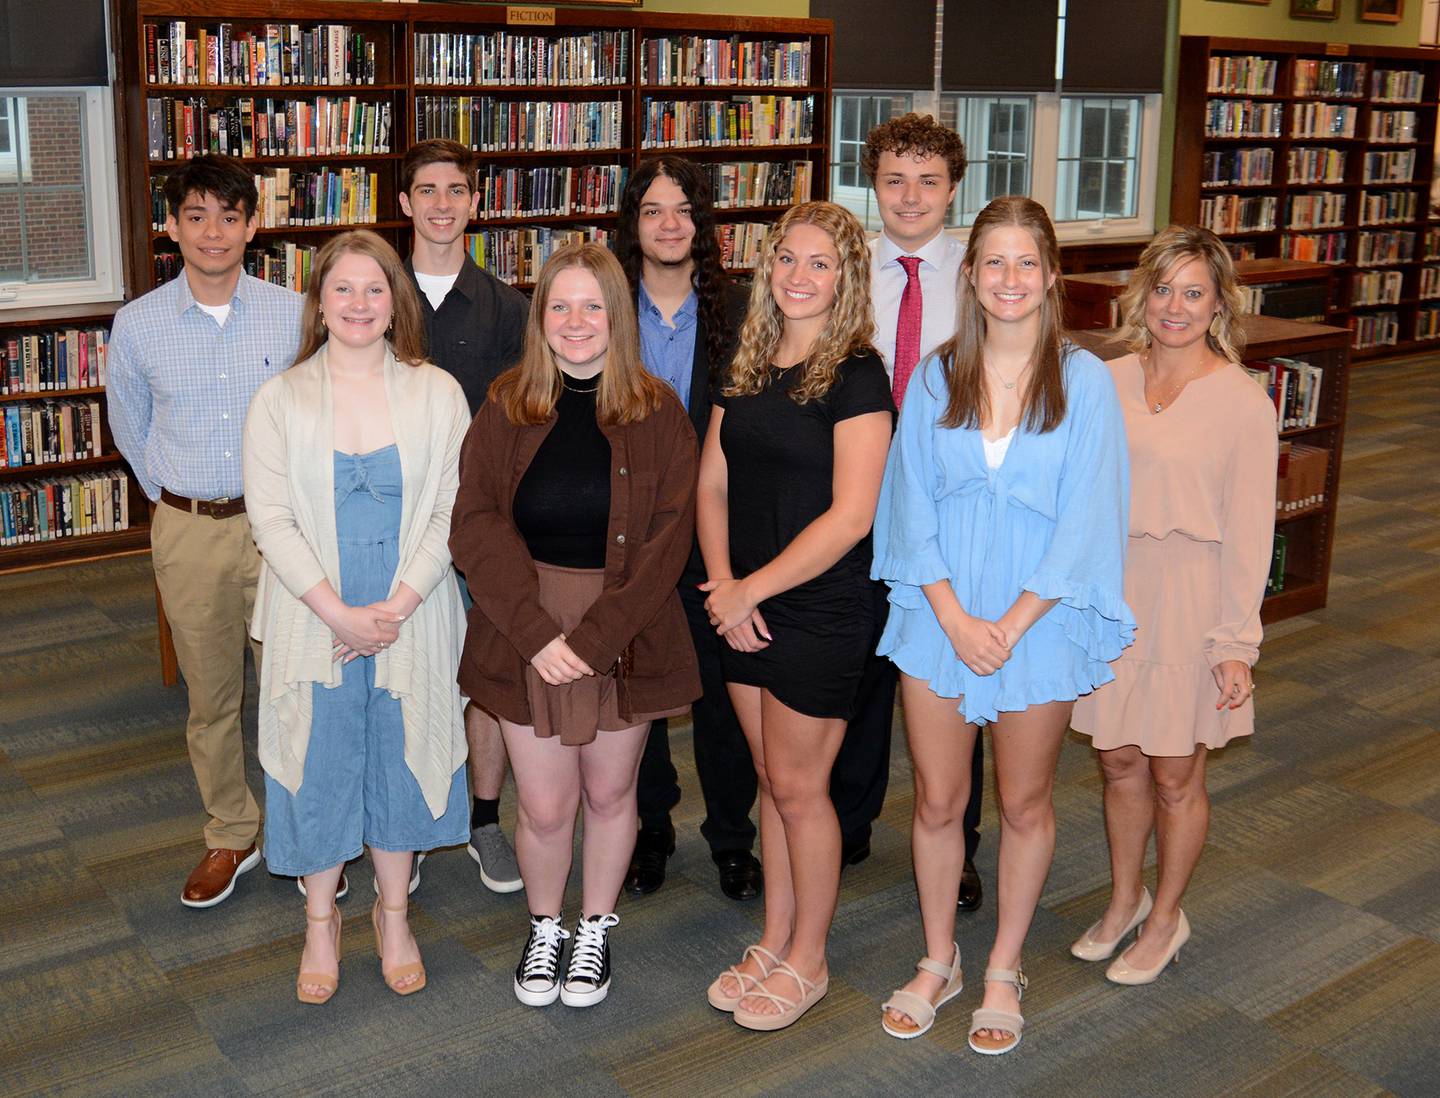 La Salle-Peru High School announced the recipients of the 2022 Wagenknecht Scholarships. This year’s recipients are (front row, from left) Salutatorian Shea Rathburn, Addison Ernat, Valedictorian Elia Becker, Isabella Lambert, Sebastian Serratos (back row, from left), Matthew Beard, Emilio Phlippeau and Caden Valenzuela. The scholarships were presented by Tammy Humpage (back row, right) of Hometown National Bank.